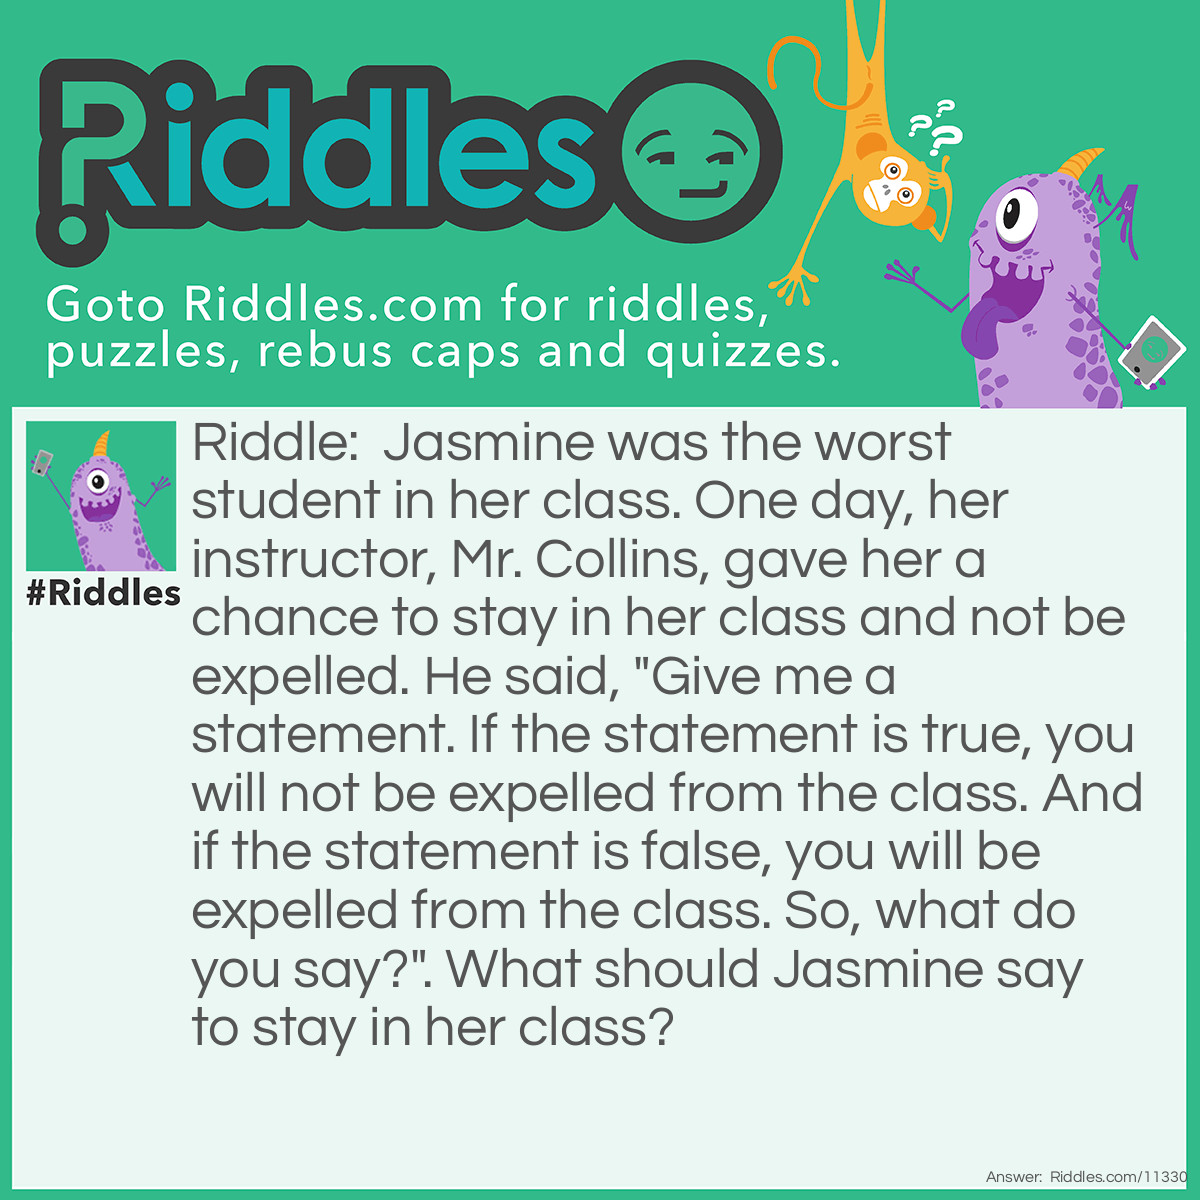 Riddle: Jasmine was the worst student in her class. One day, her instructor, Mr. Collins, gave her a chance to stay in her class and not be expelled. He said, "Give me a statement. If the statement is true, you will not be expelled from the class. And if the statement is false, you will be expelled from the class. So, what do you say?". What should Jasmine say to stay in her class? Answer: Jasmine should say, "I will be expelled from the class,". If we suppose that the statement is true, then Jasmine would not be expelled from the class. But then, it makes the statement false. And if we suppose that the statement is false, then Jasmine would be expelled from the class. But then, it makes the statement true. This phrase creates a paradox, as it cannot be true AND false at the same time.